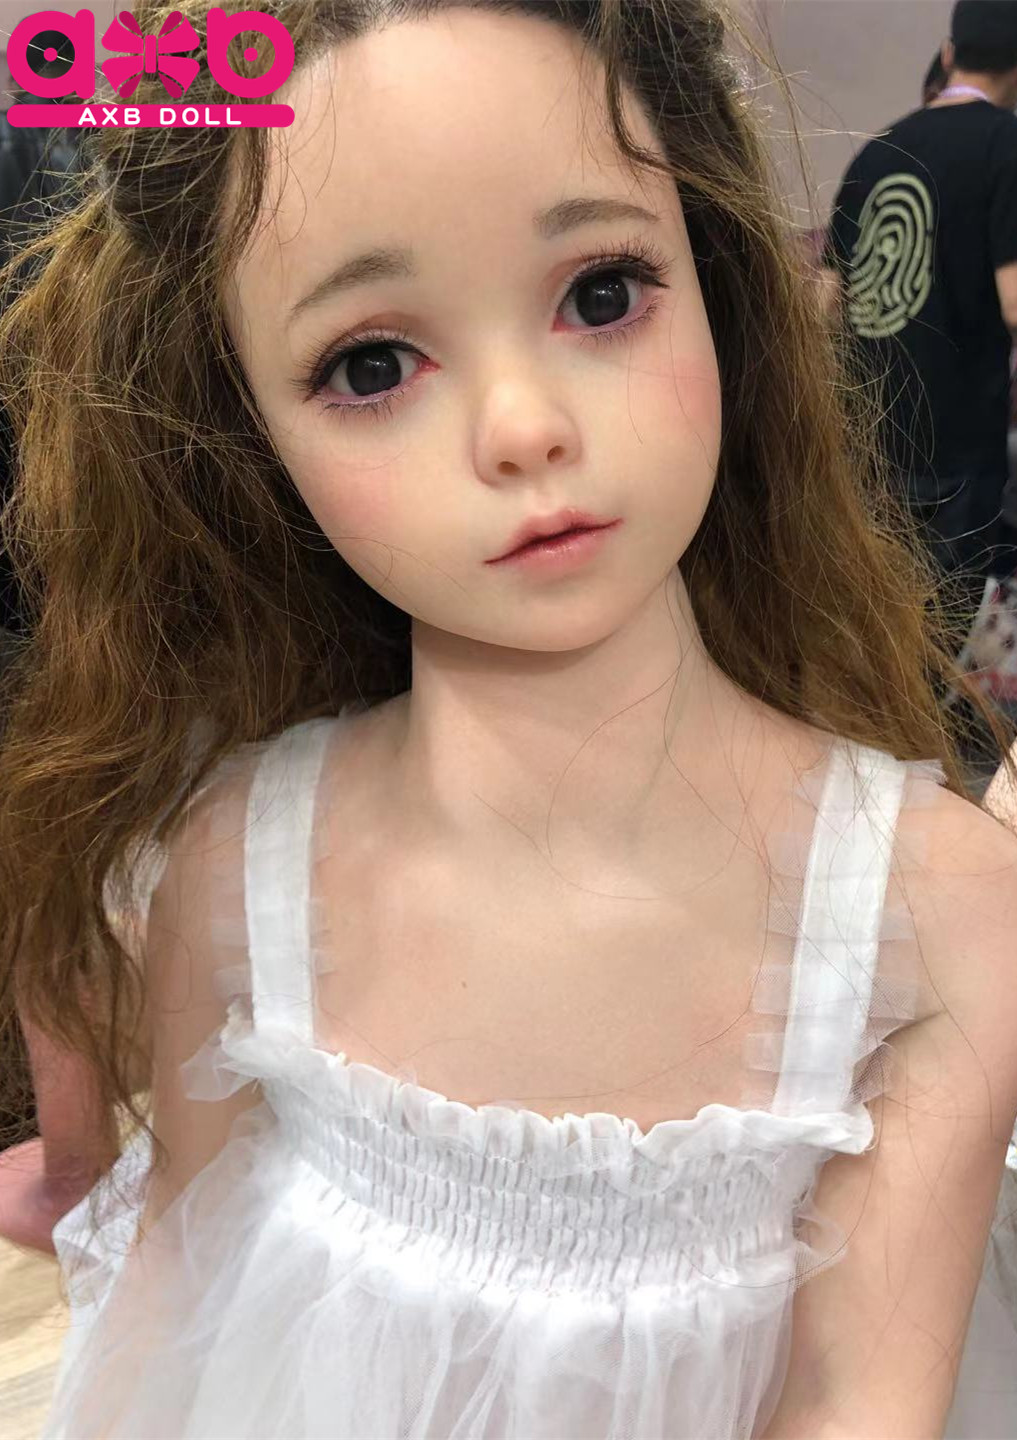 AXBDOLL G26R# Super Real Silicone Doll - 画像をクリックして閉じます